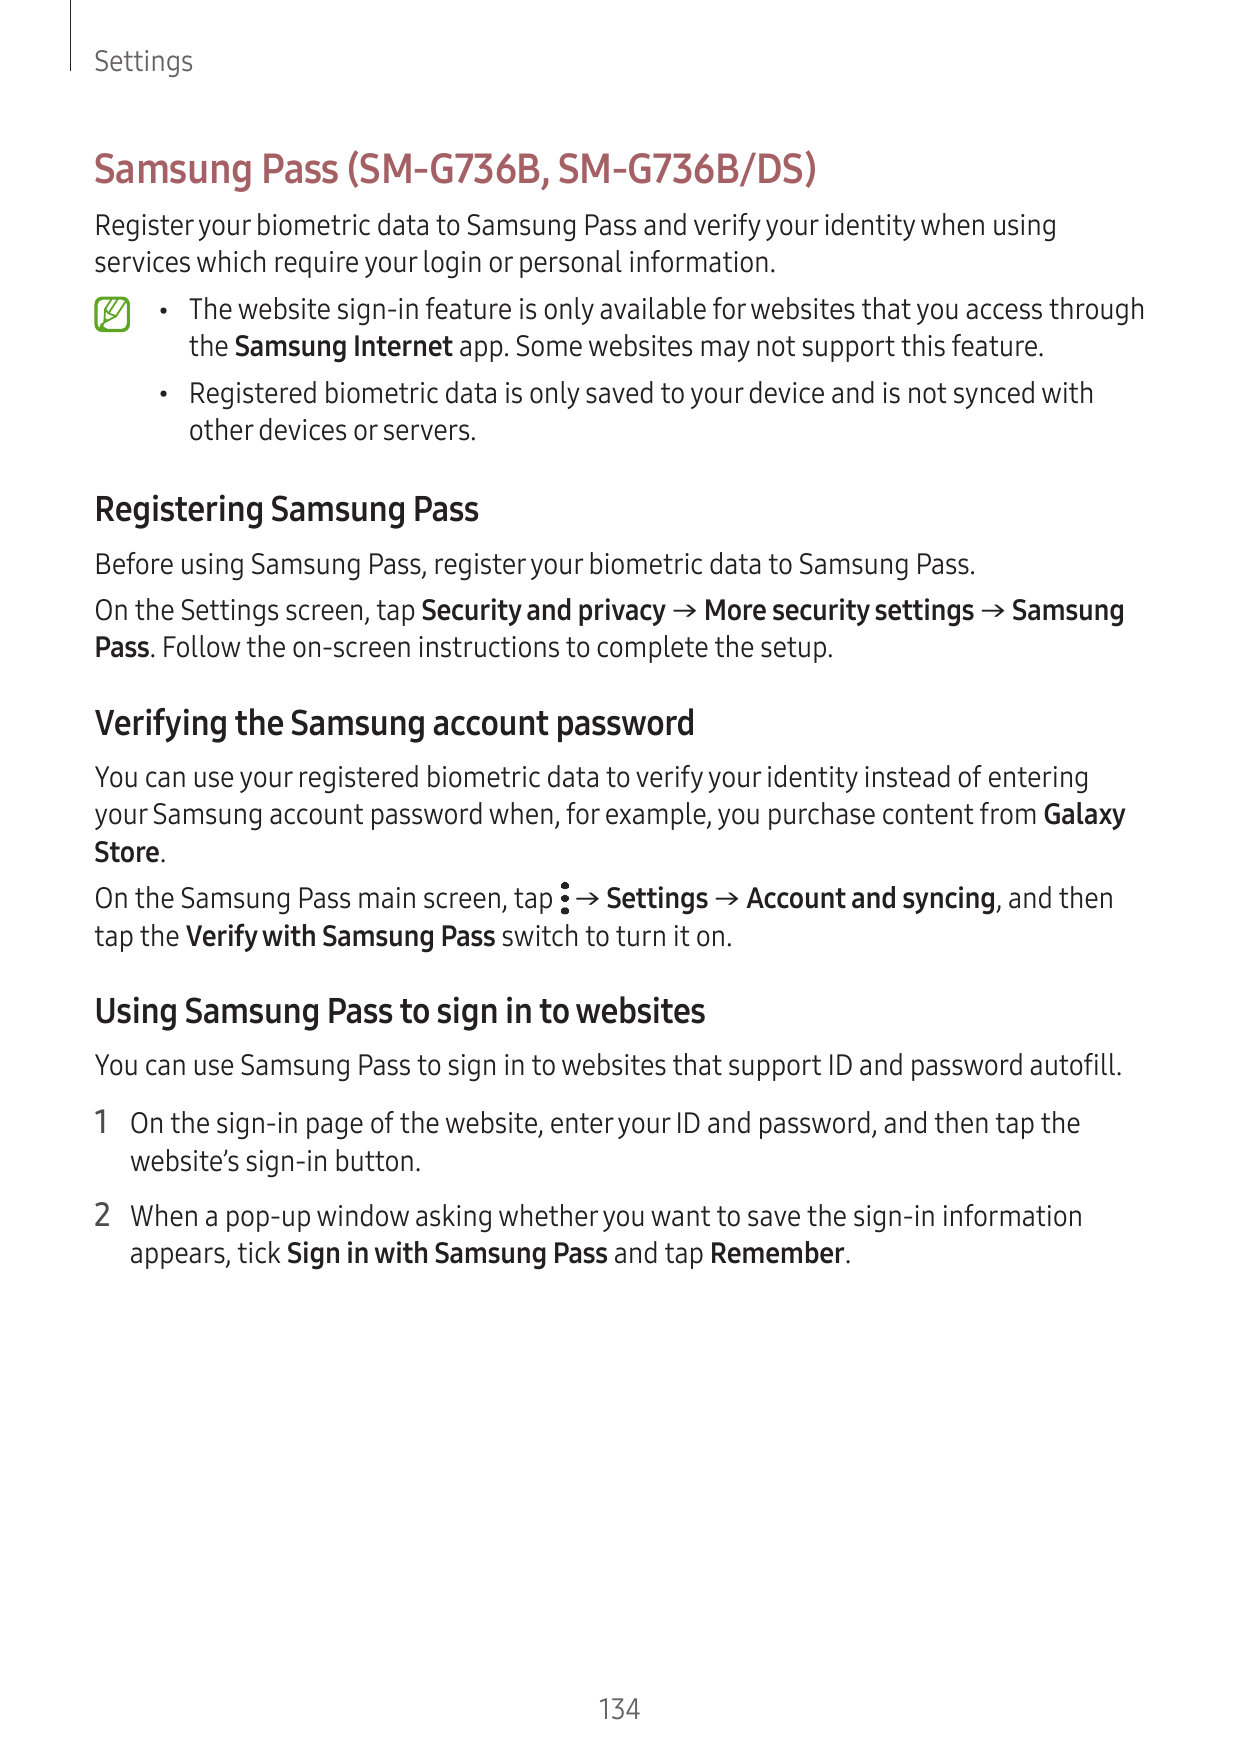 SettingsSamsung Pass (SM-G736B, SM-G736B/DS)Register your biometric data to Samsung Pass and verify your identity when usingserv